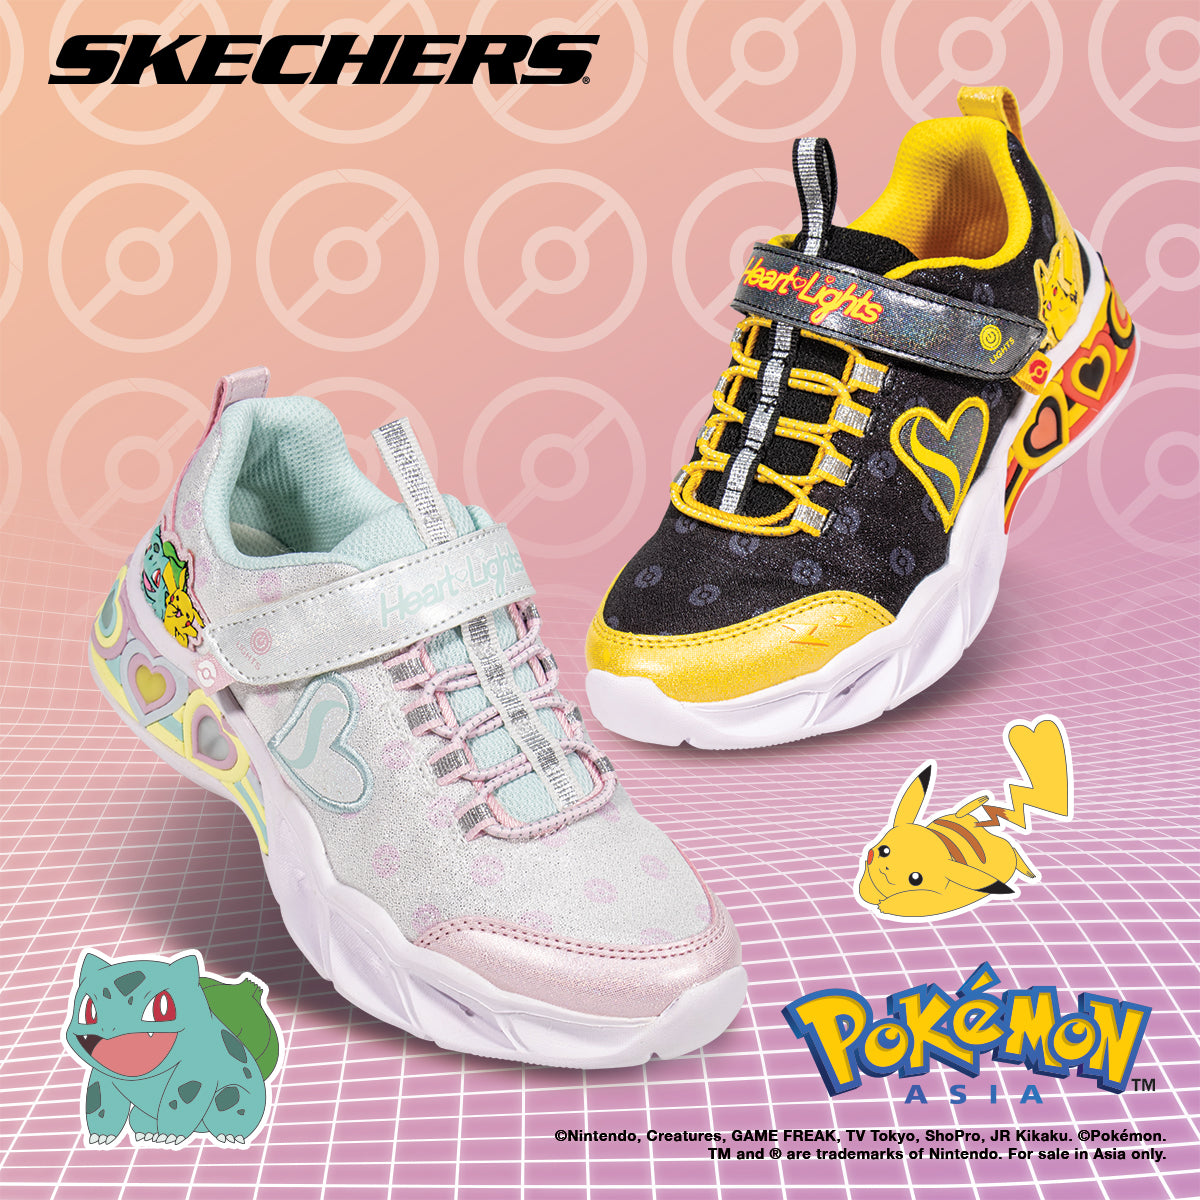 Pokémon Collection by Skechers – Skechers Singapore Store